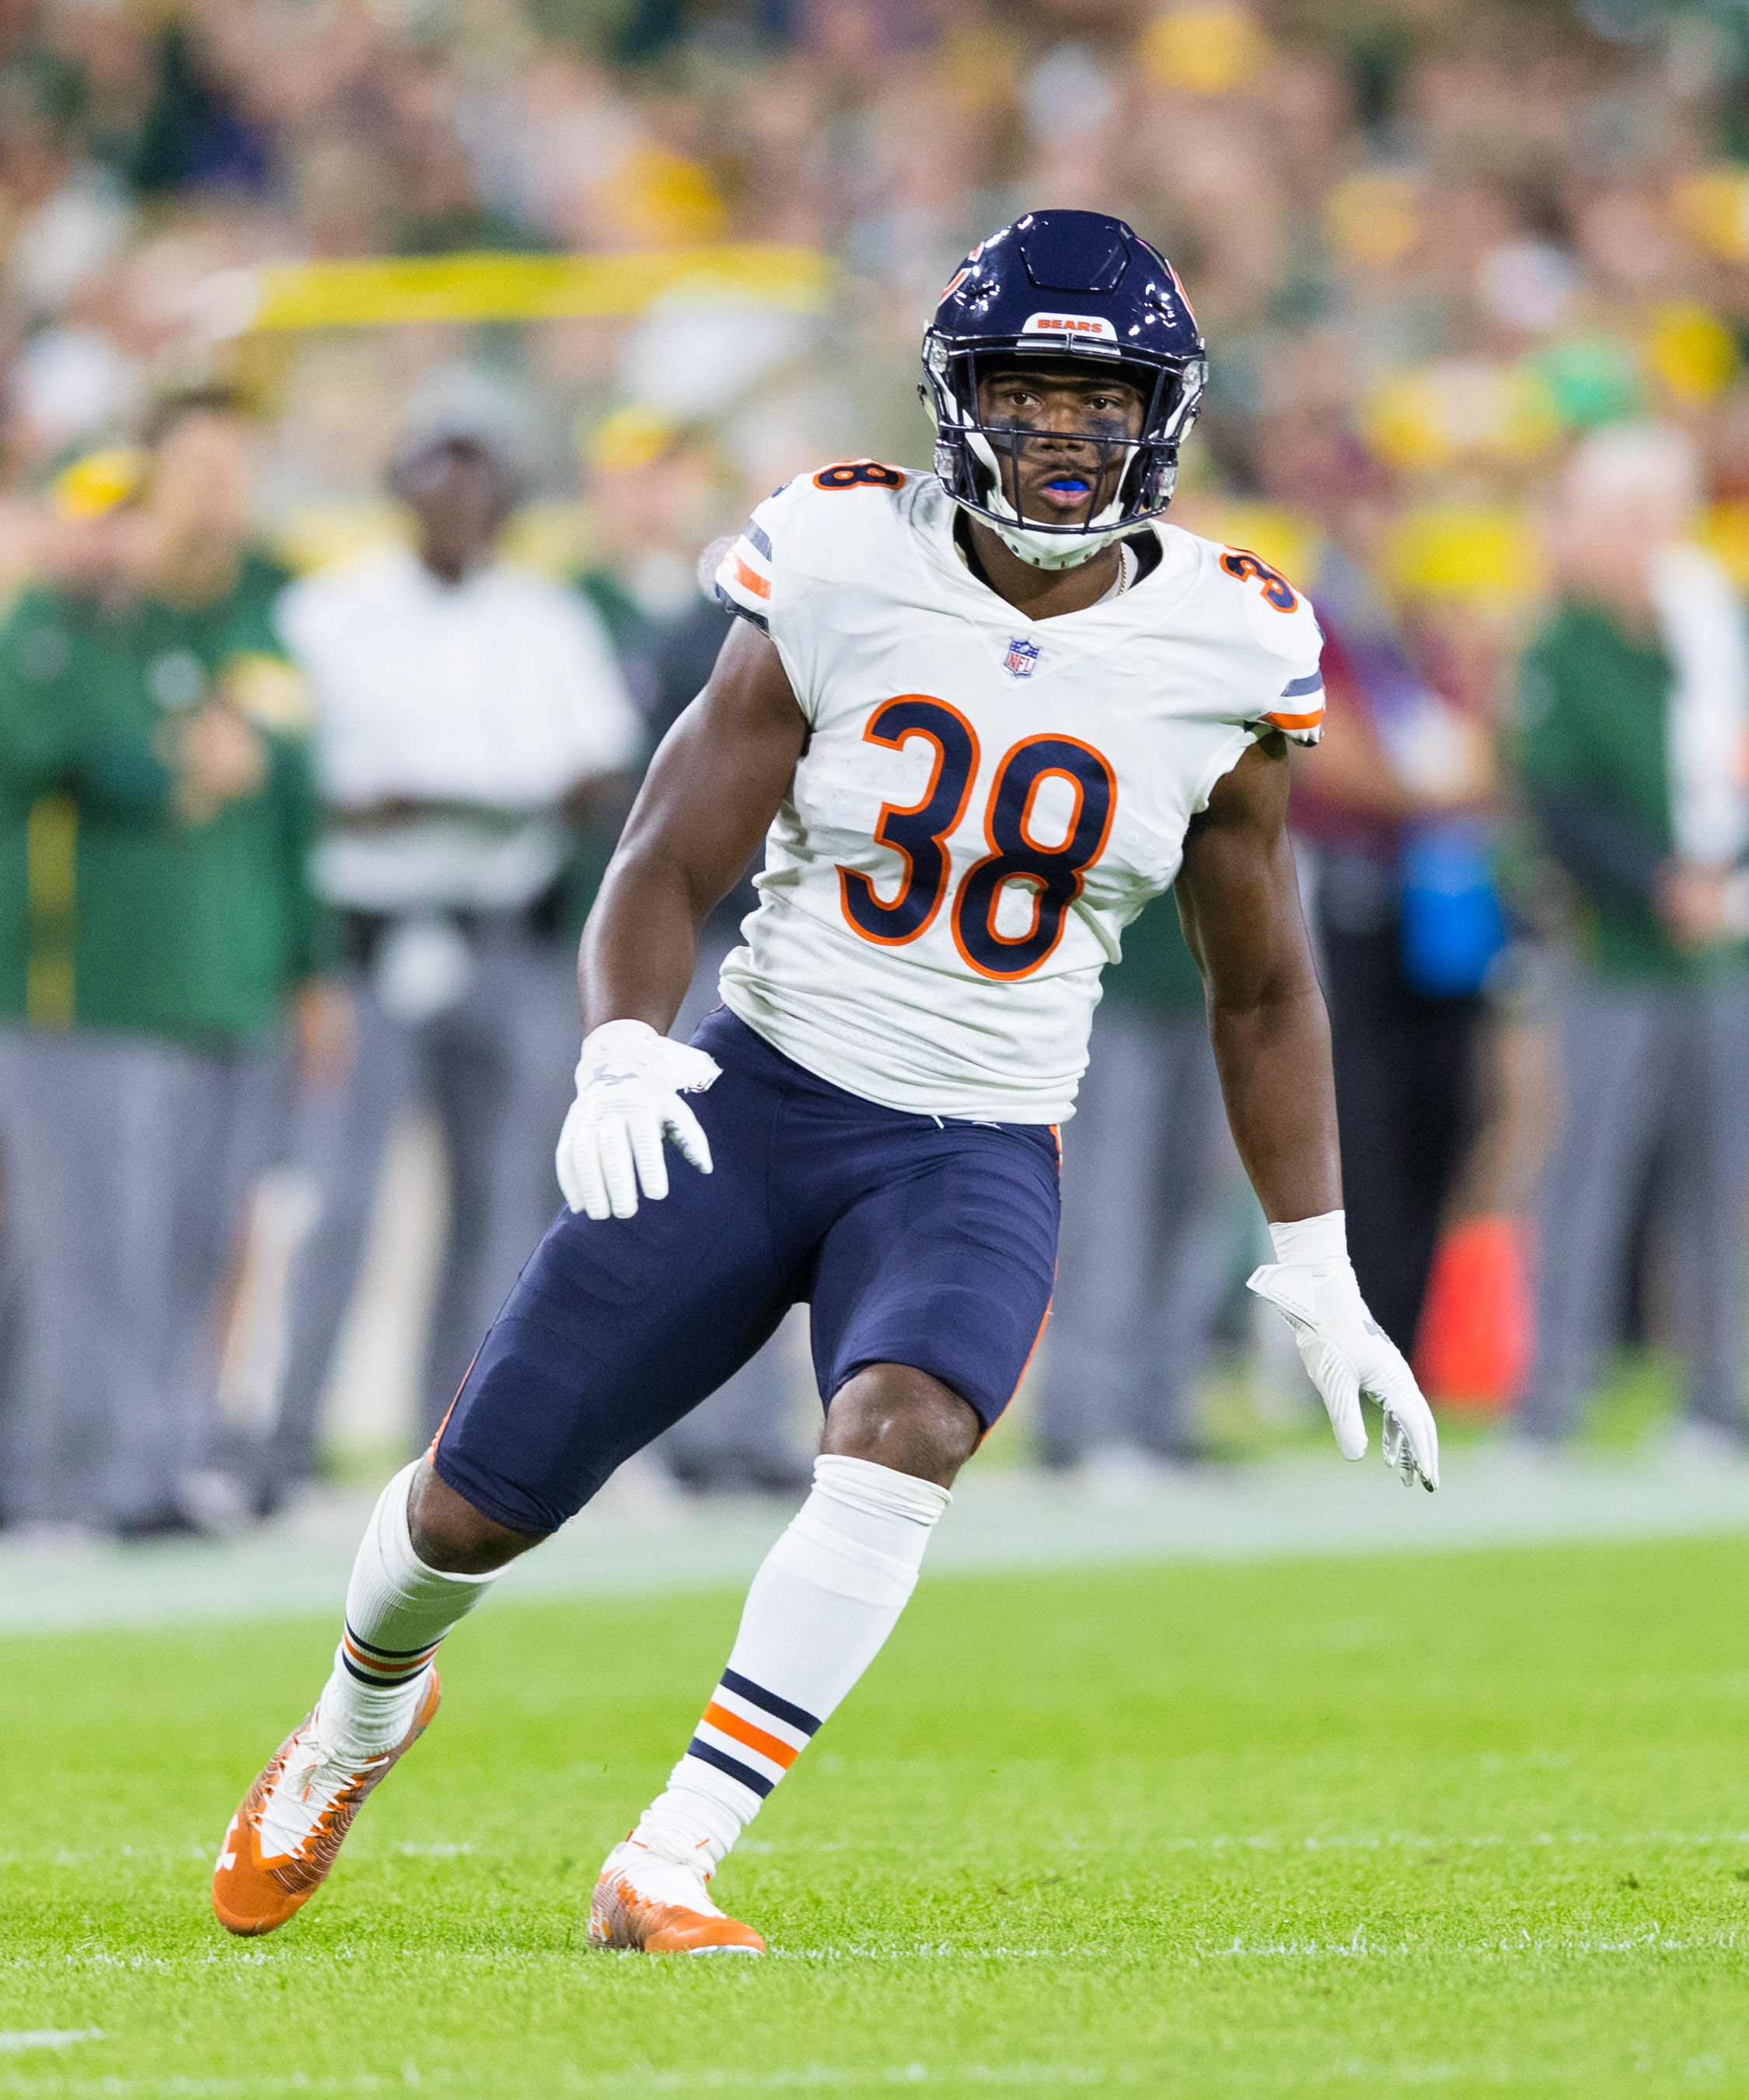 NFL: Chicago Bears at Green Bay Packers